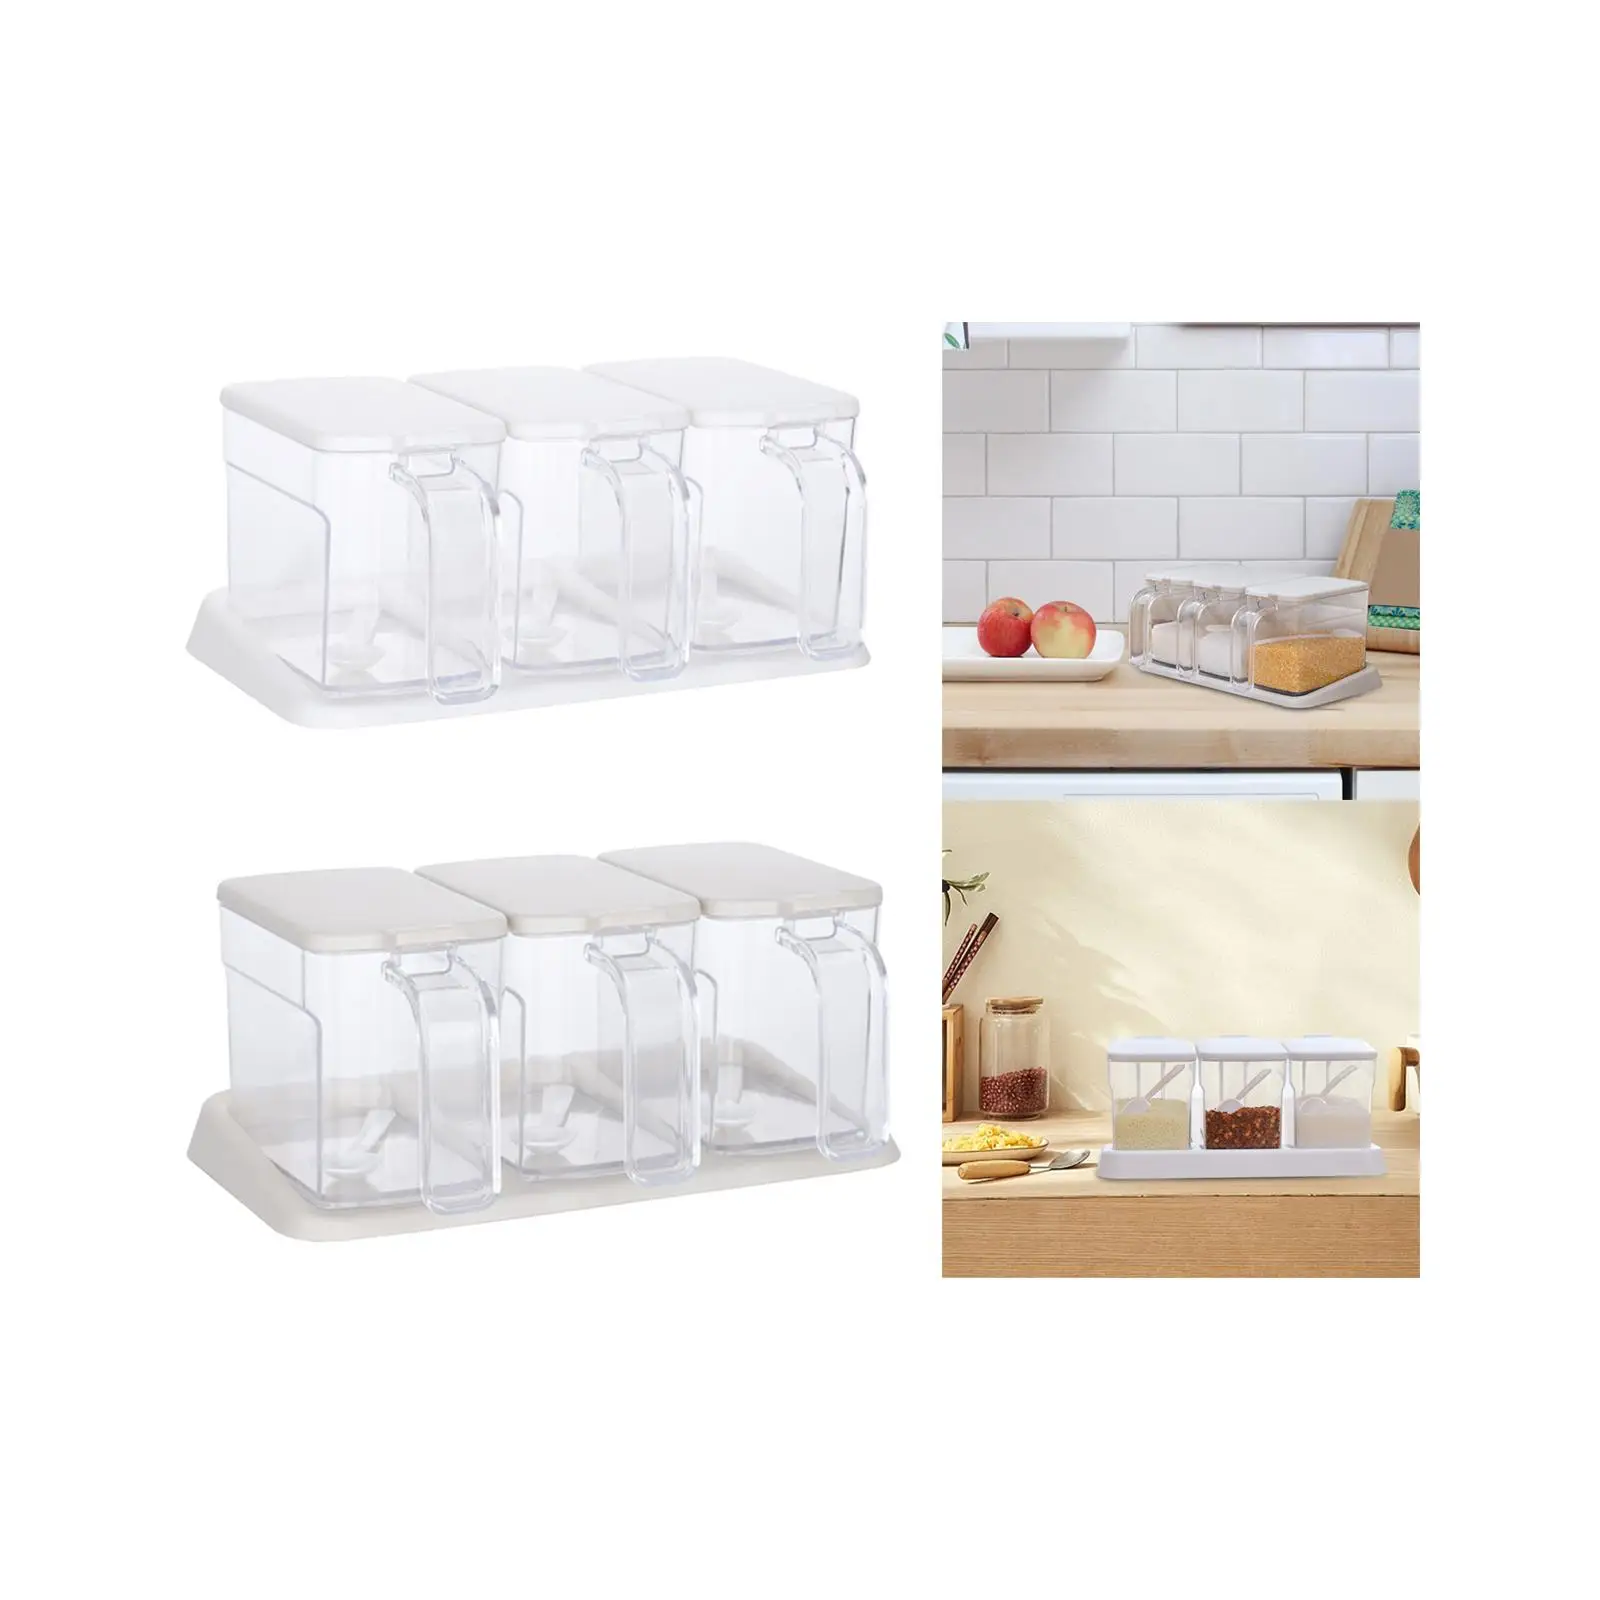 Clear Seasoning Box Removable with Base Seasoning Rack Canister Kitchen Spice Pots Condiments Container for Sugar Salt Spice